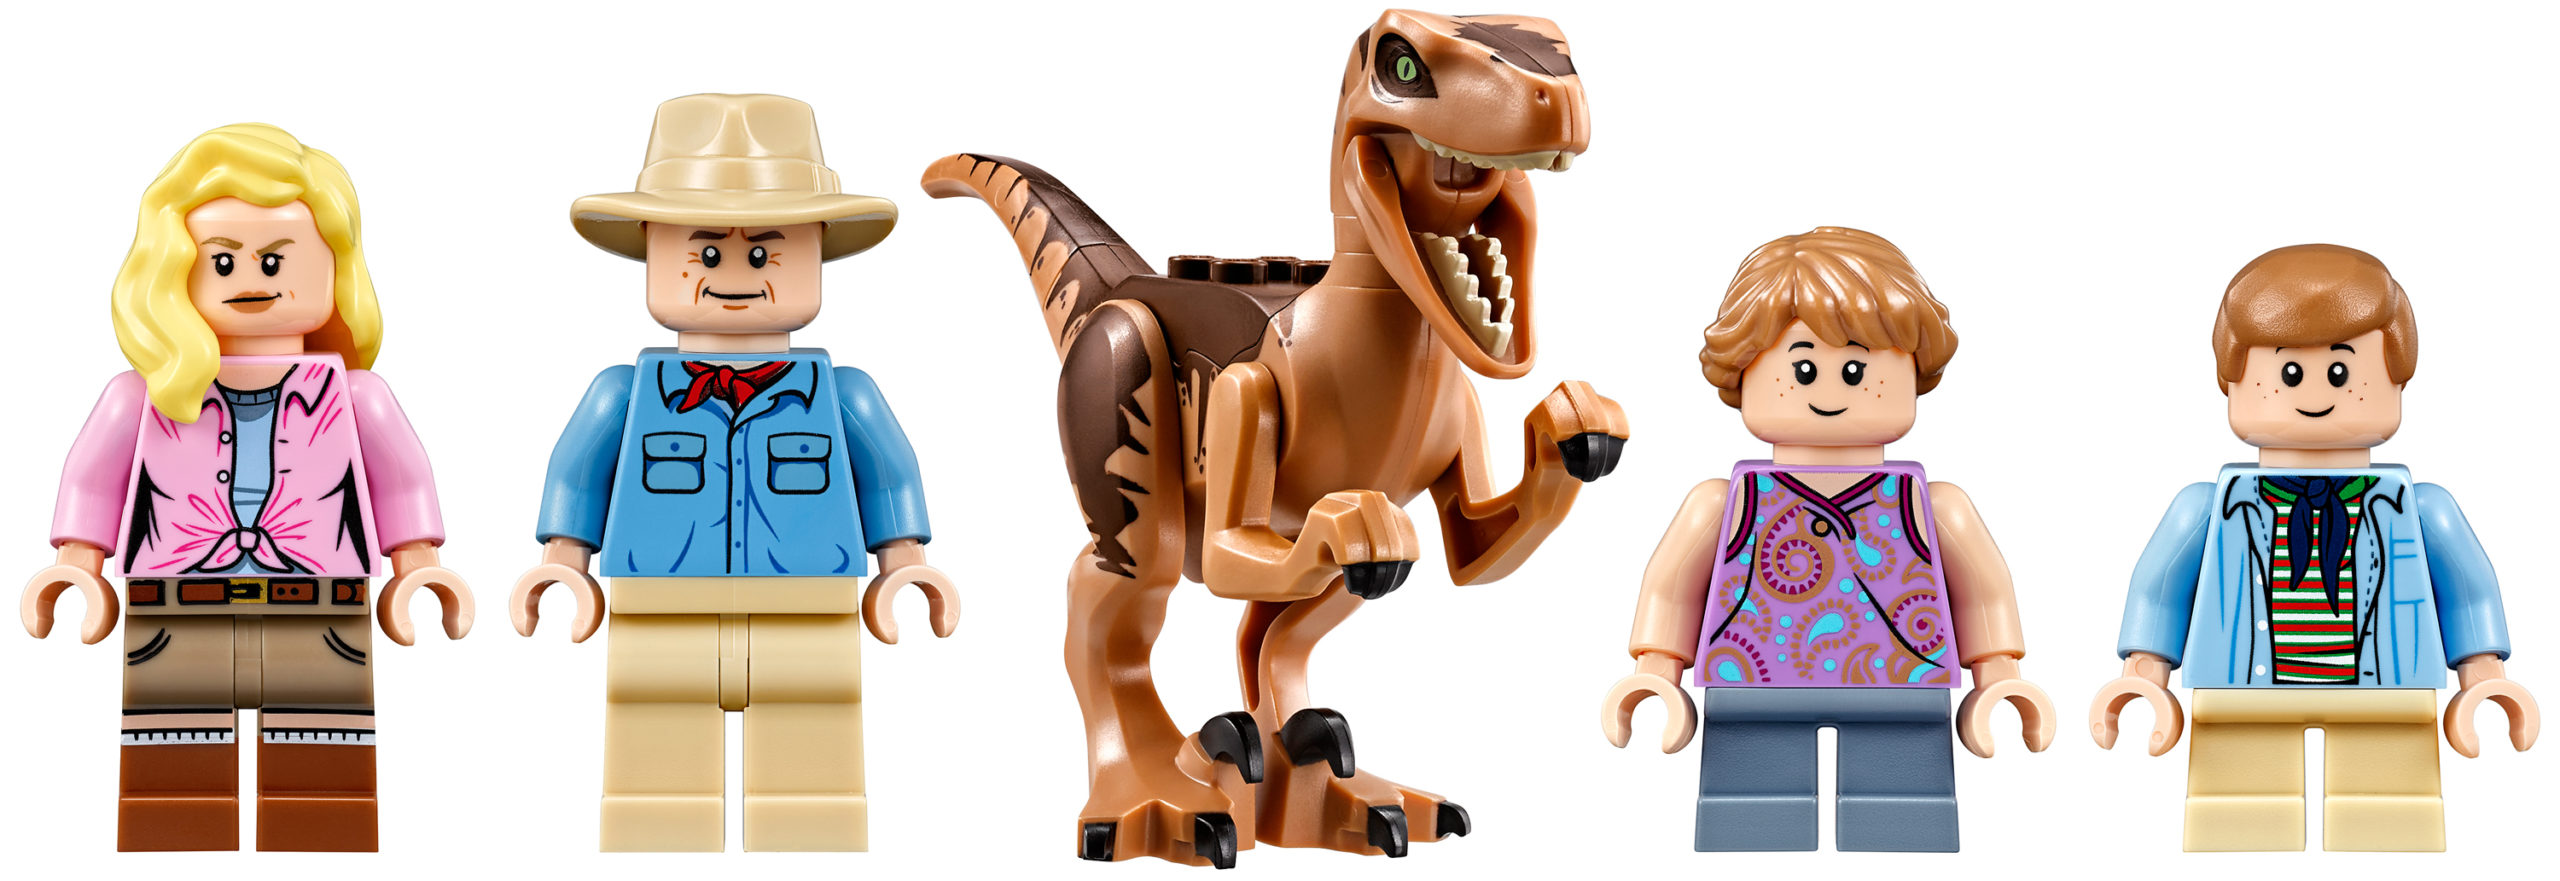 LEGO Has Finally Given Me The Jurassic Park LEGO Set I Wanted 25 Years Ago